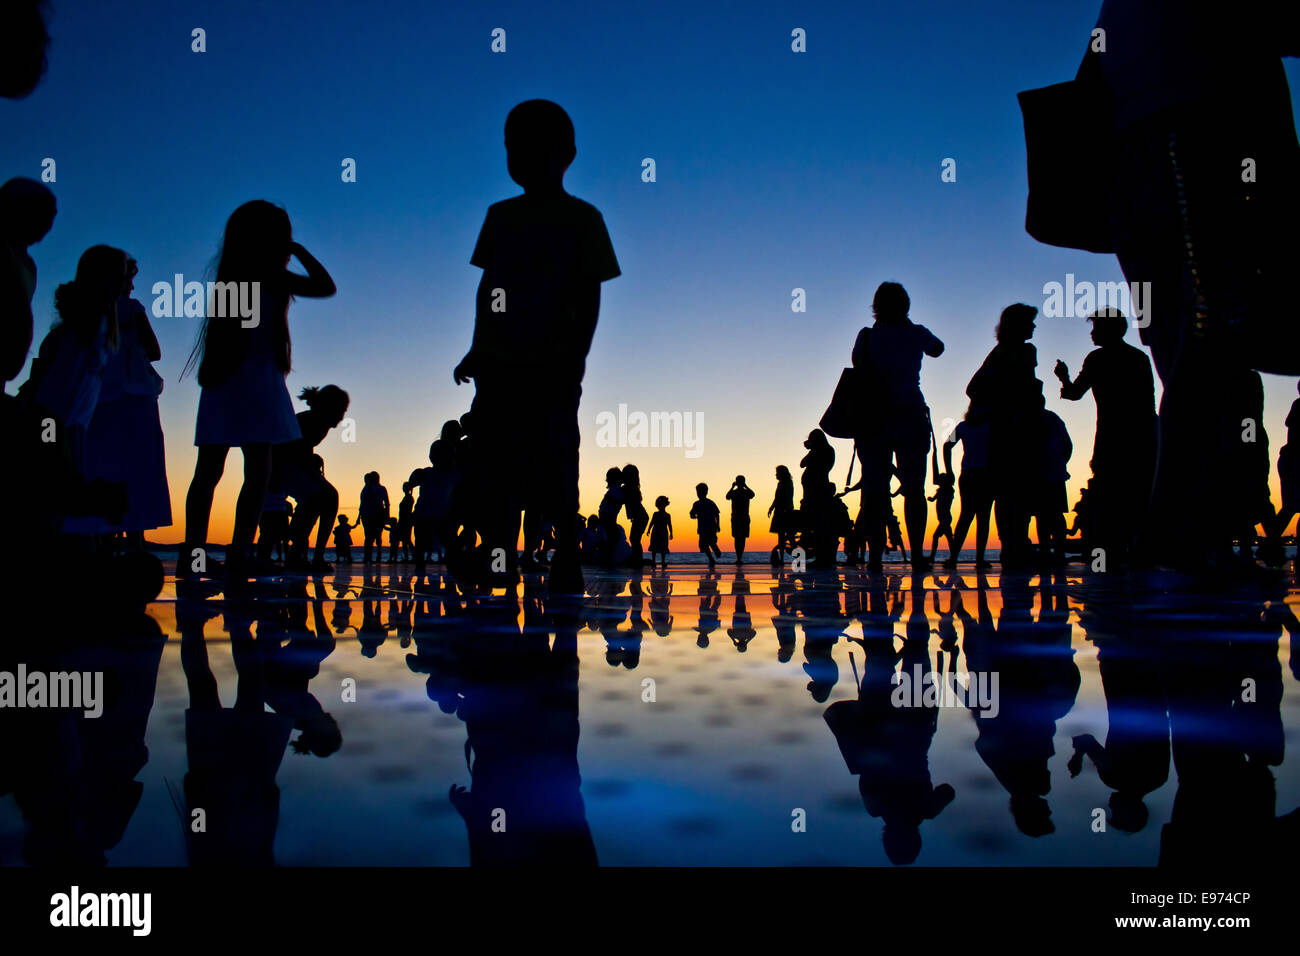 People reflections on colorful sunset Stock Photo